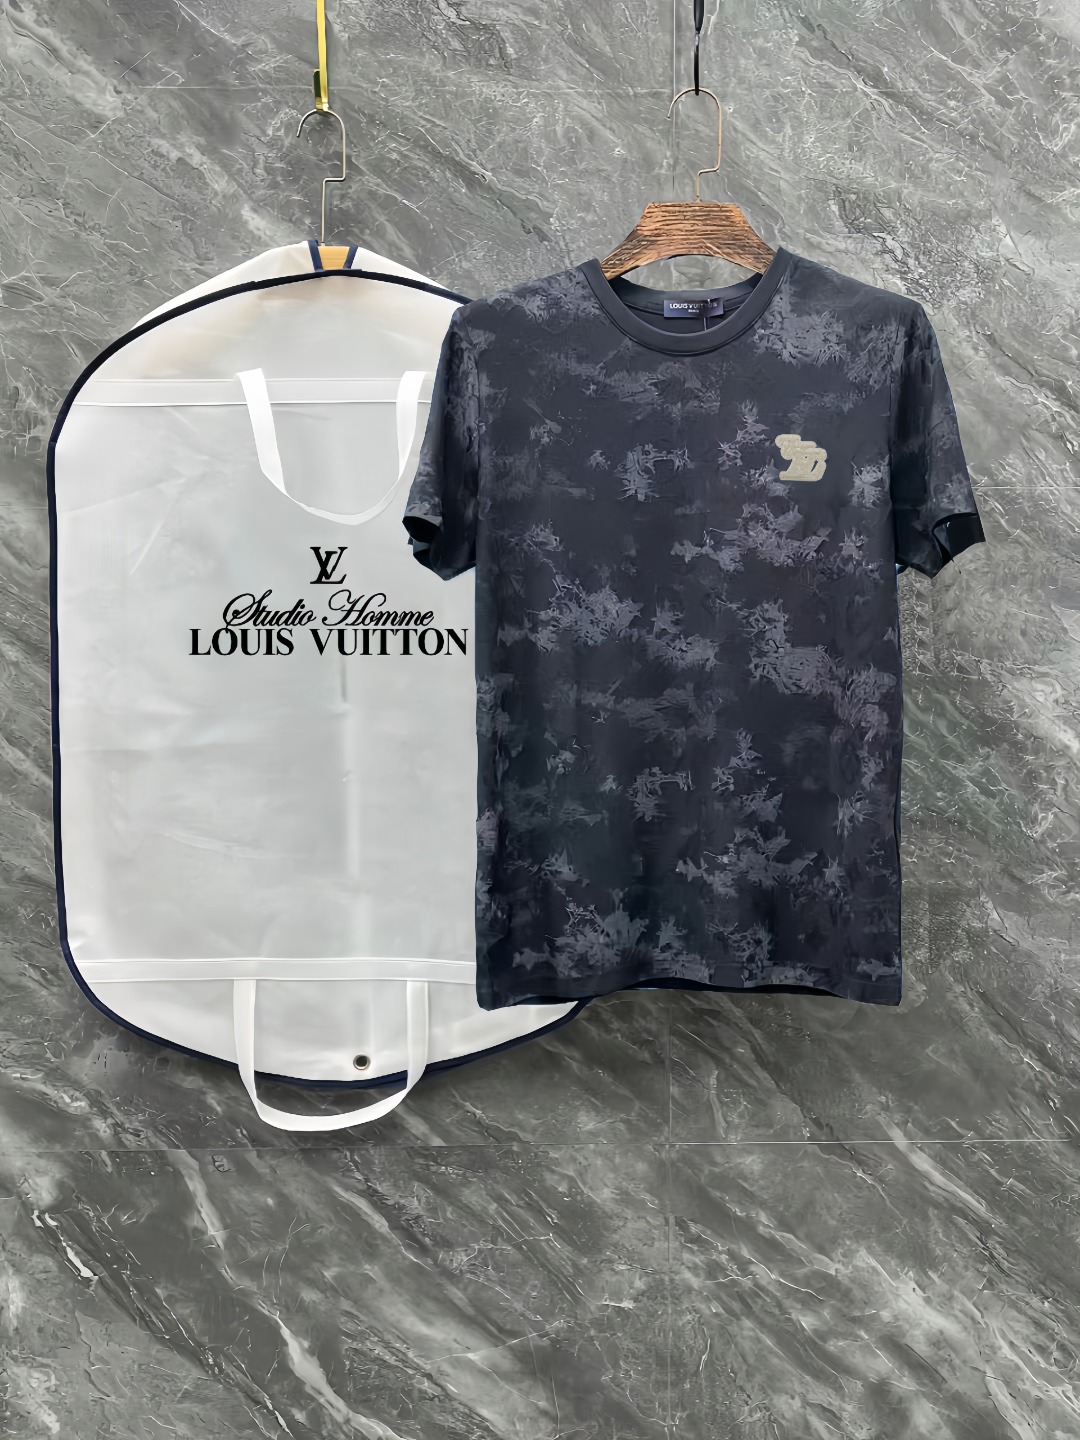 Louis Vuitton Clothing T-Shirt Best Quality Replica
 Black White Unisex Cotton Mercerized Spring/Summer Collection Fashion Short Sleeve